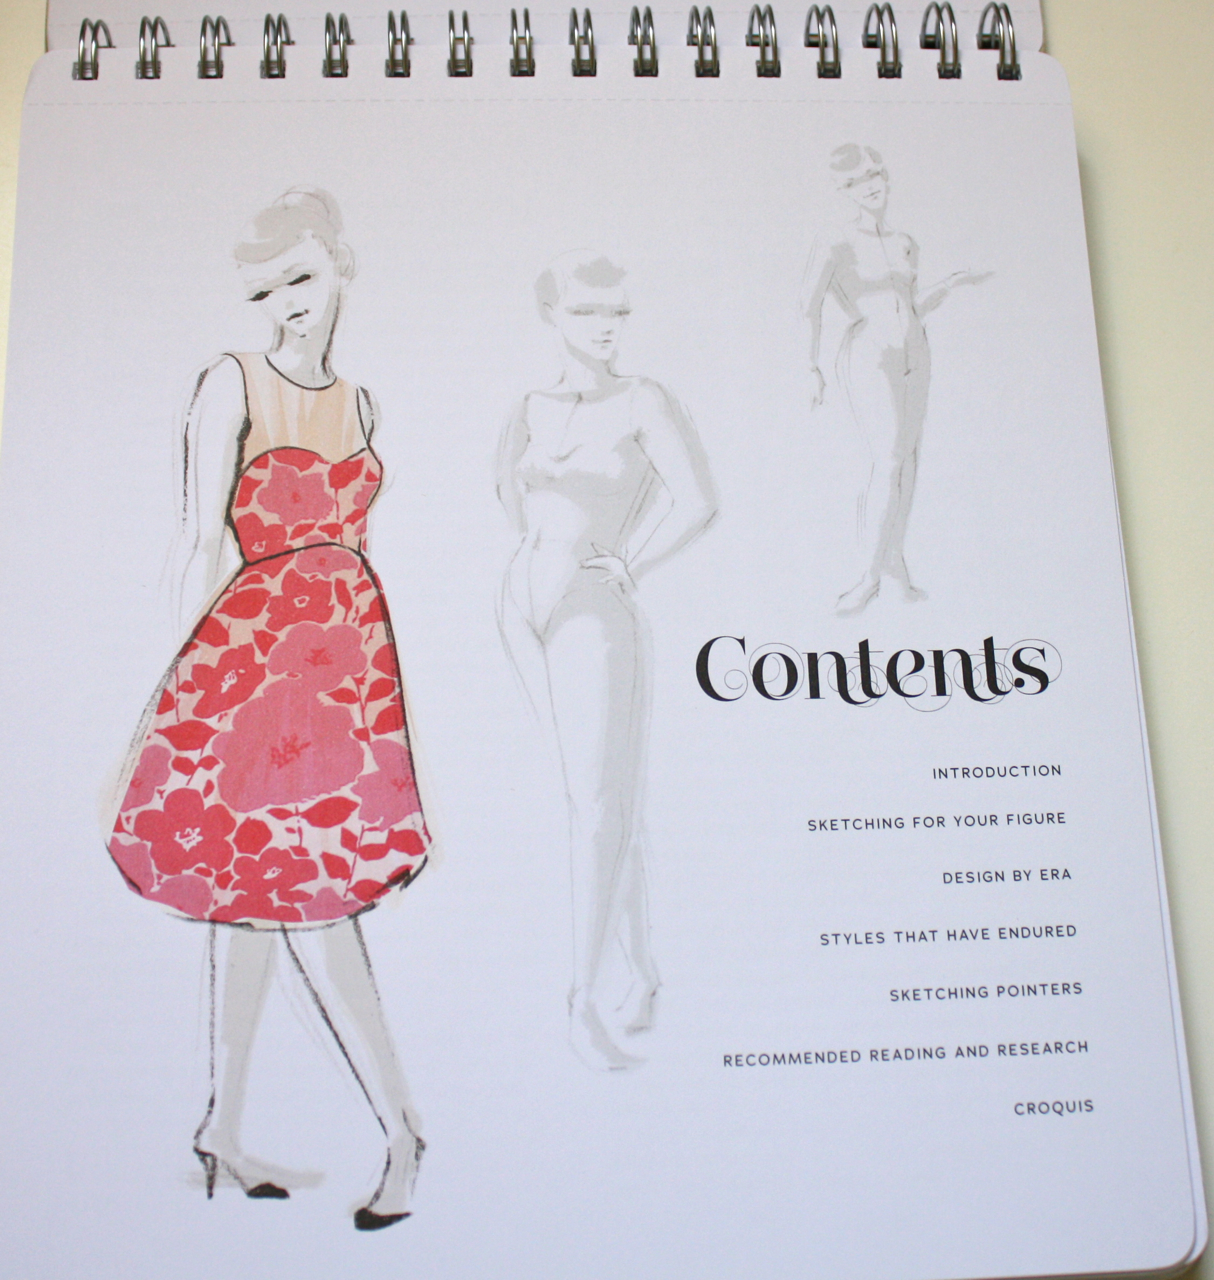 Gertie's New Blog for Better Sewing: Using Gertie's New Fashion Sketchbook